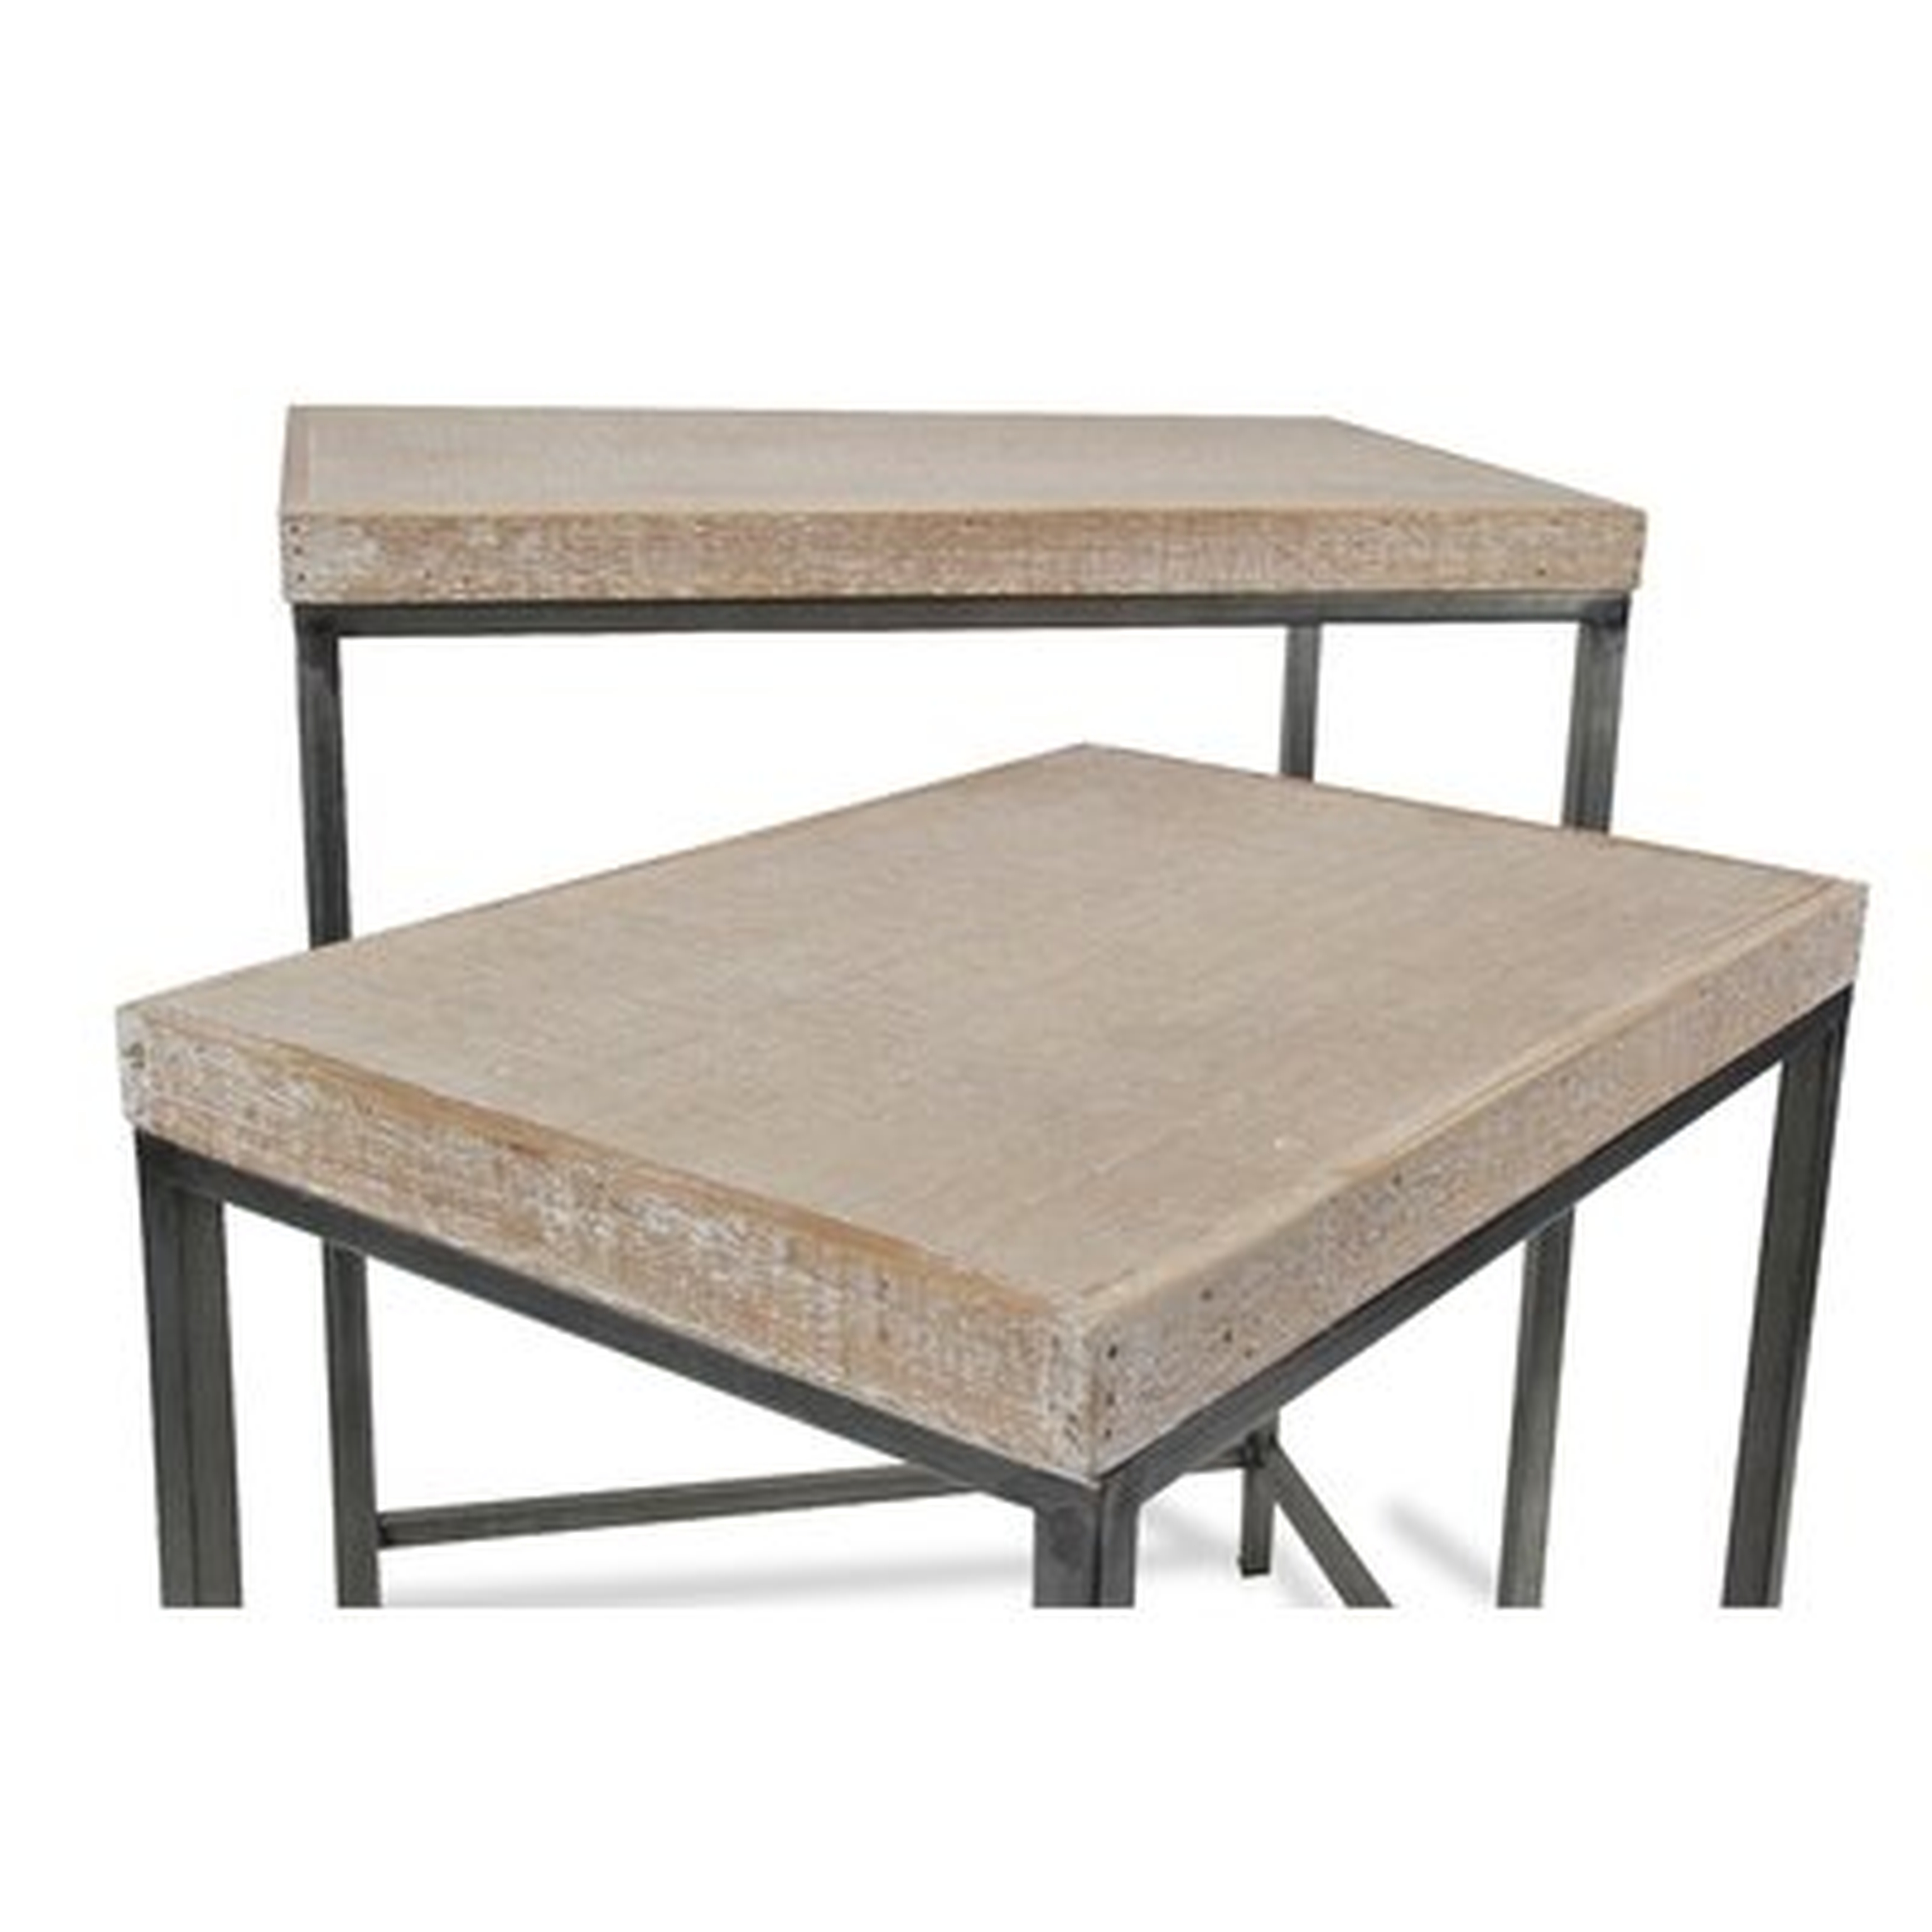 Joziah Set Of 2, White Washed, Brown Wood Topped Nesting Tables - Wayfair